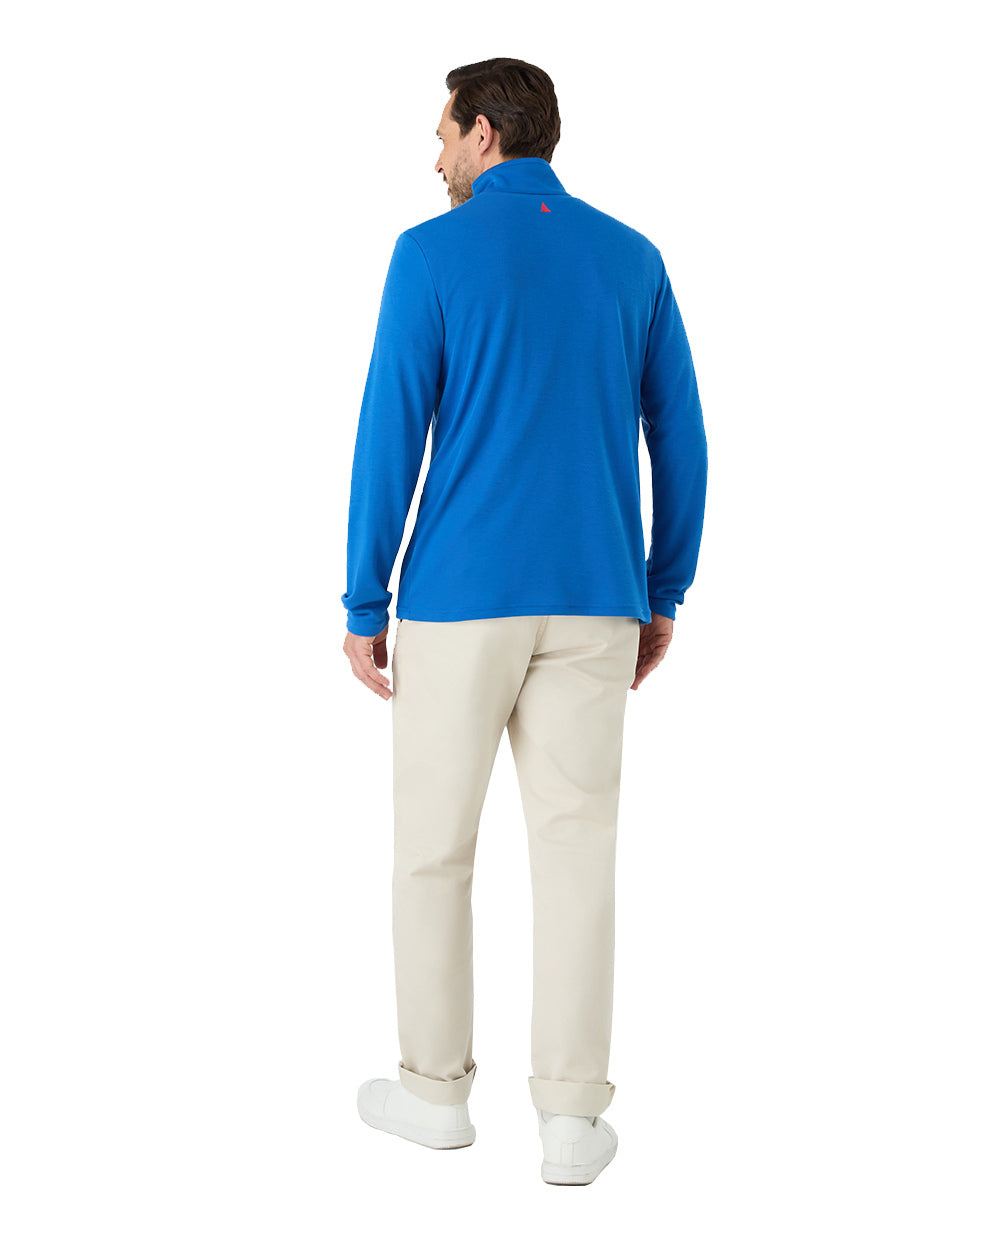 Aruba Blue Coloured Musto Mens Fast Dry Half Zip Top On A White Background 